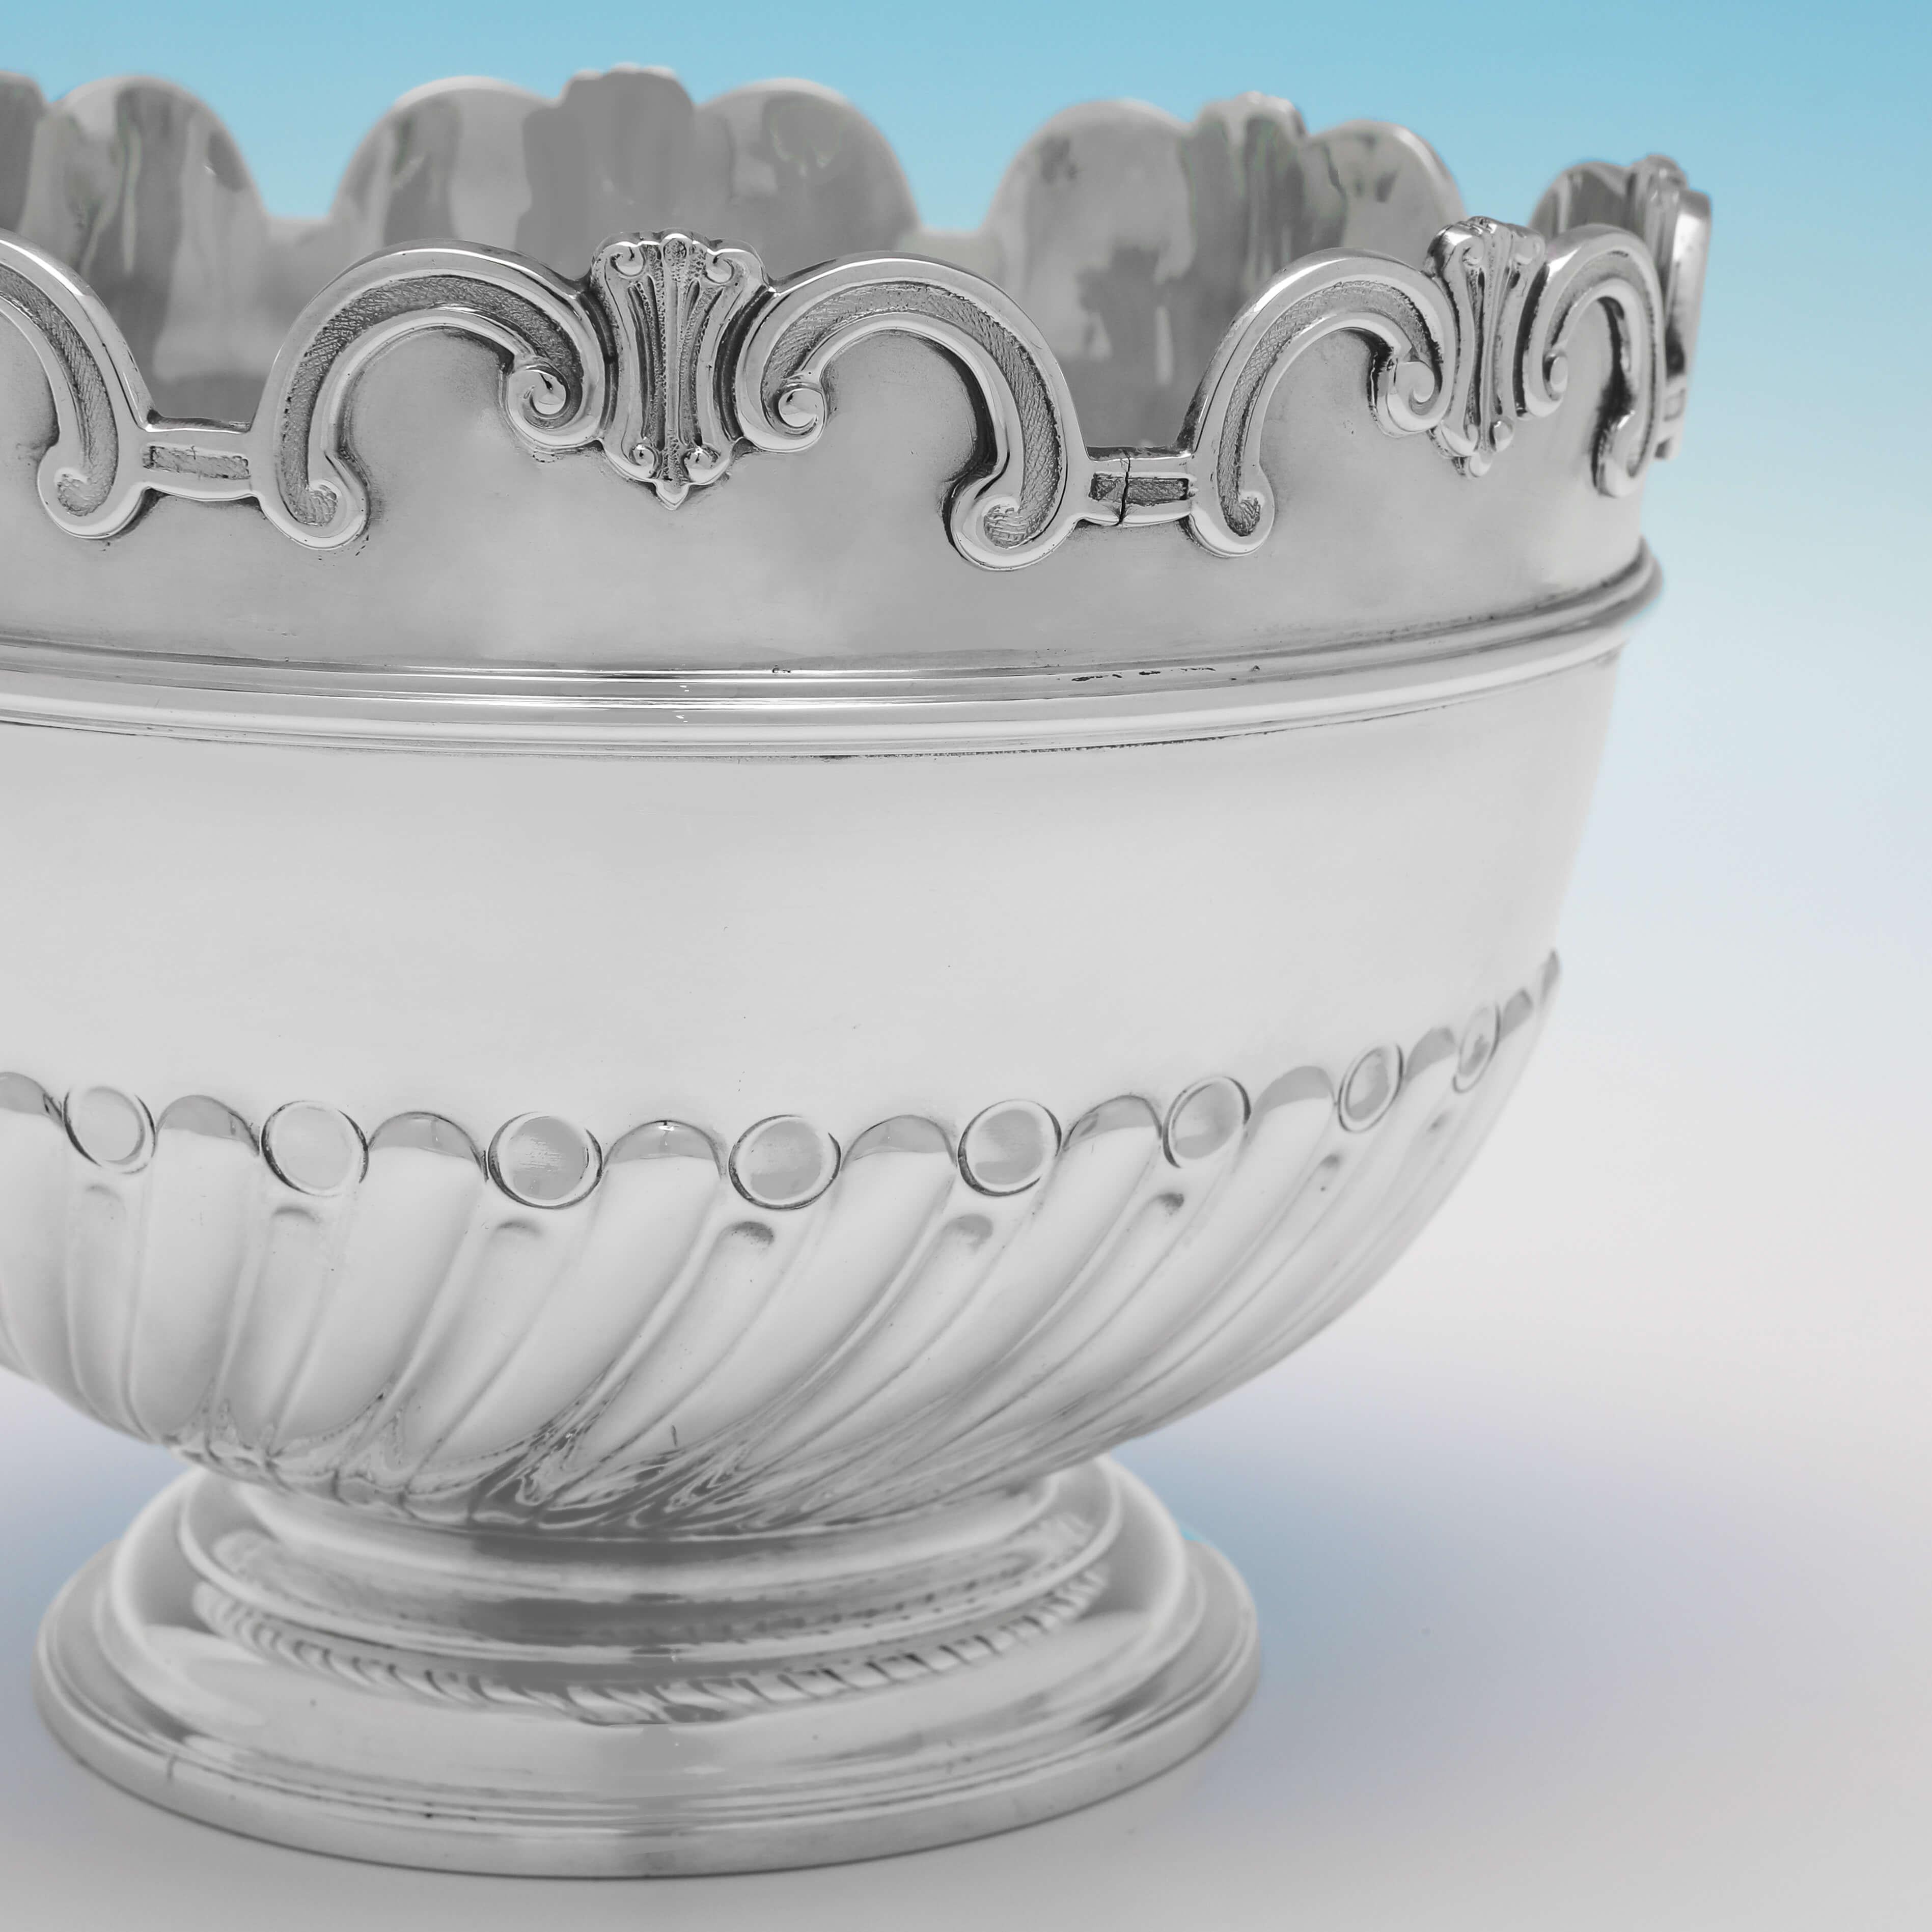 Hallmarked in London in 1896 by Charles Stuart Harris, this attractive, Antique Sterling Silver Bowl, features a shaped rim, and sunken and swirled fluting to the body. 

The bowl measures 4.5